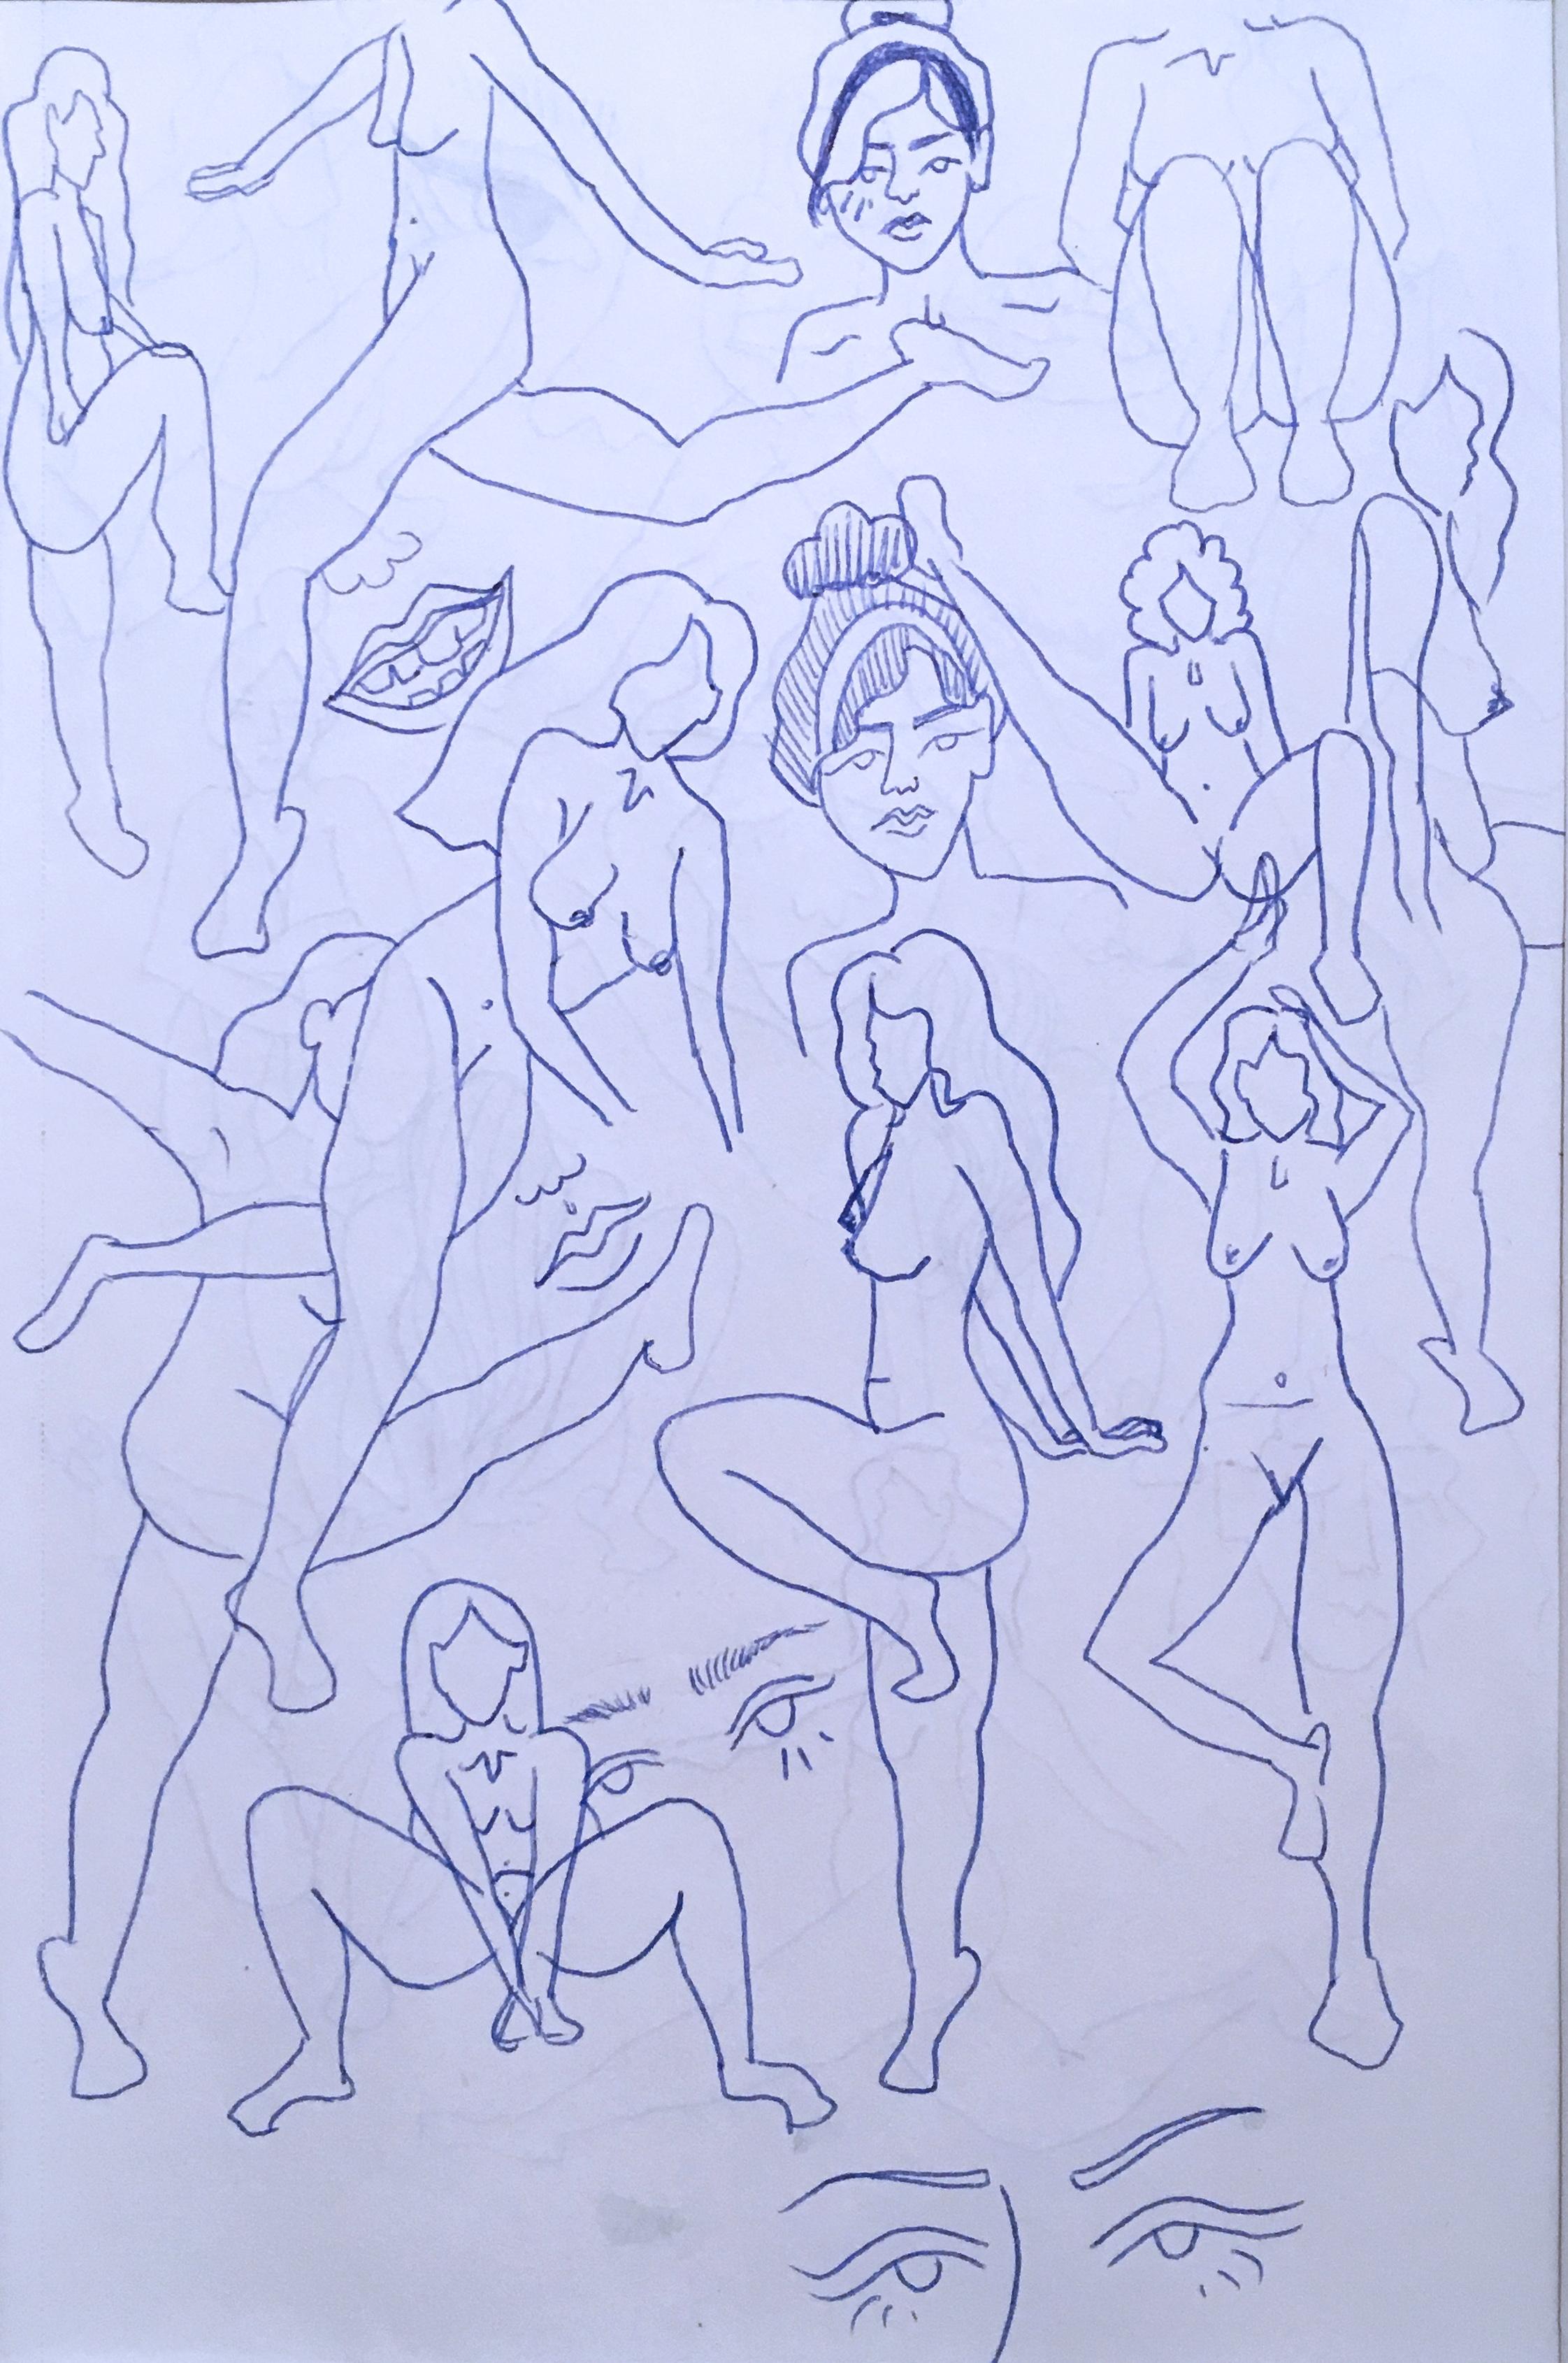 Blue Nudes II, Ink on Paper Drawing, Blue & White, Figurative Study Women, Faces - Contemporary Art by SarahGrace